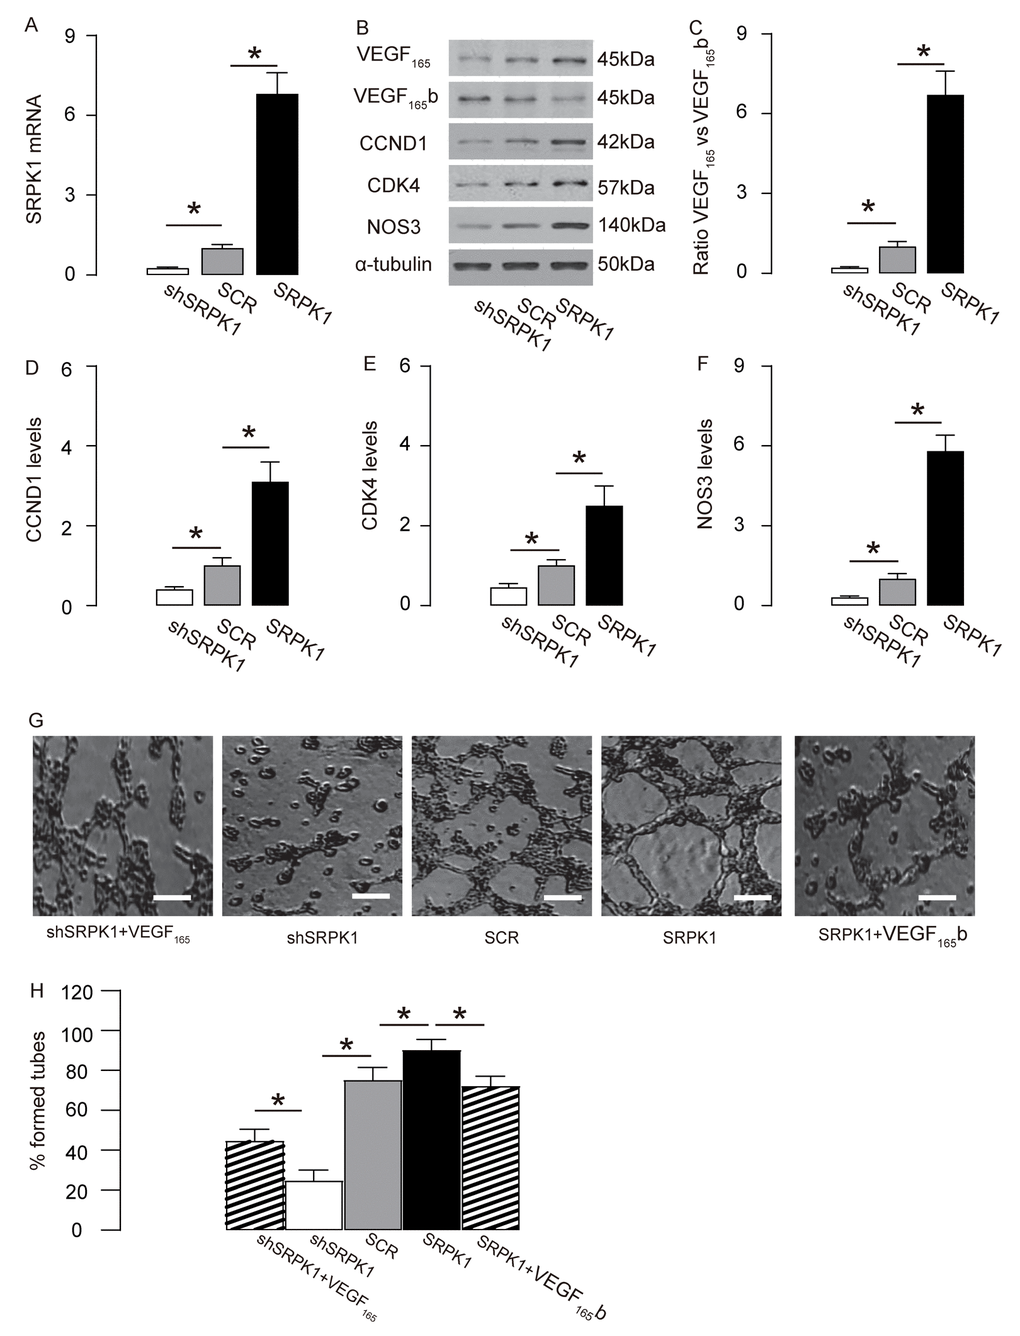 SRPK1 promotes AEC proliferation through increasing pro-angiogenic splicing of VEGF-A in vitro. (A) RT-qPCR for SRPK1 in shSRPK1, or SCR, or SRPK1- transfected MS1 cells. (B) Representative western blots of SRPK1-modified MS1 cells. (C-F) Quantification of ratio of VEGF165 versus VEGF165b (C), CCND1 (D), CDK4 (E) and NOS3 (F) protein levels in SRPK1-modified MS1 cells. (G-H) Tube formation assay using SRPK1/VEGF165/VEGF165b -modified MS1 cells, shown by representative images (G), and by quantification (H). *p